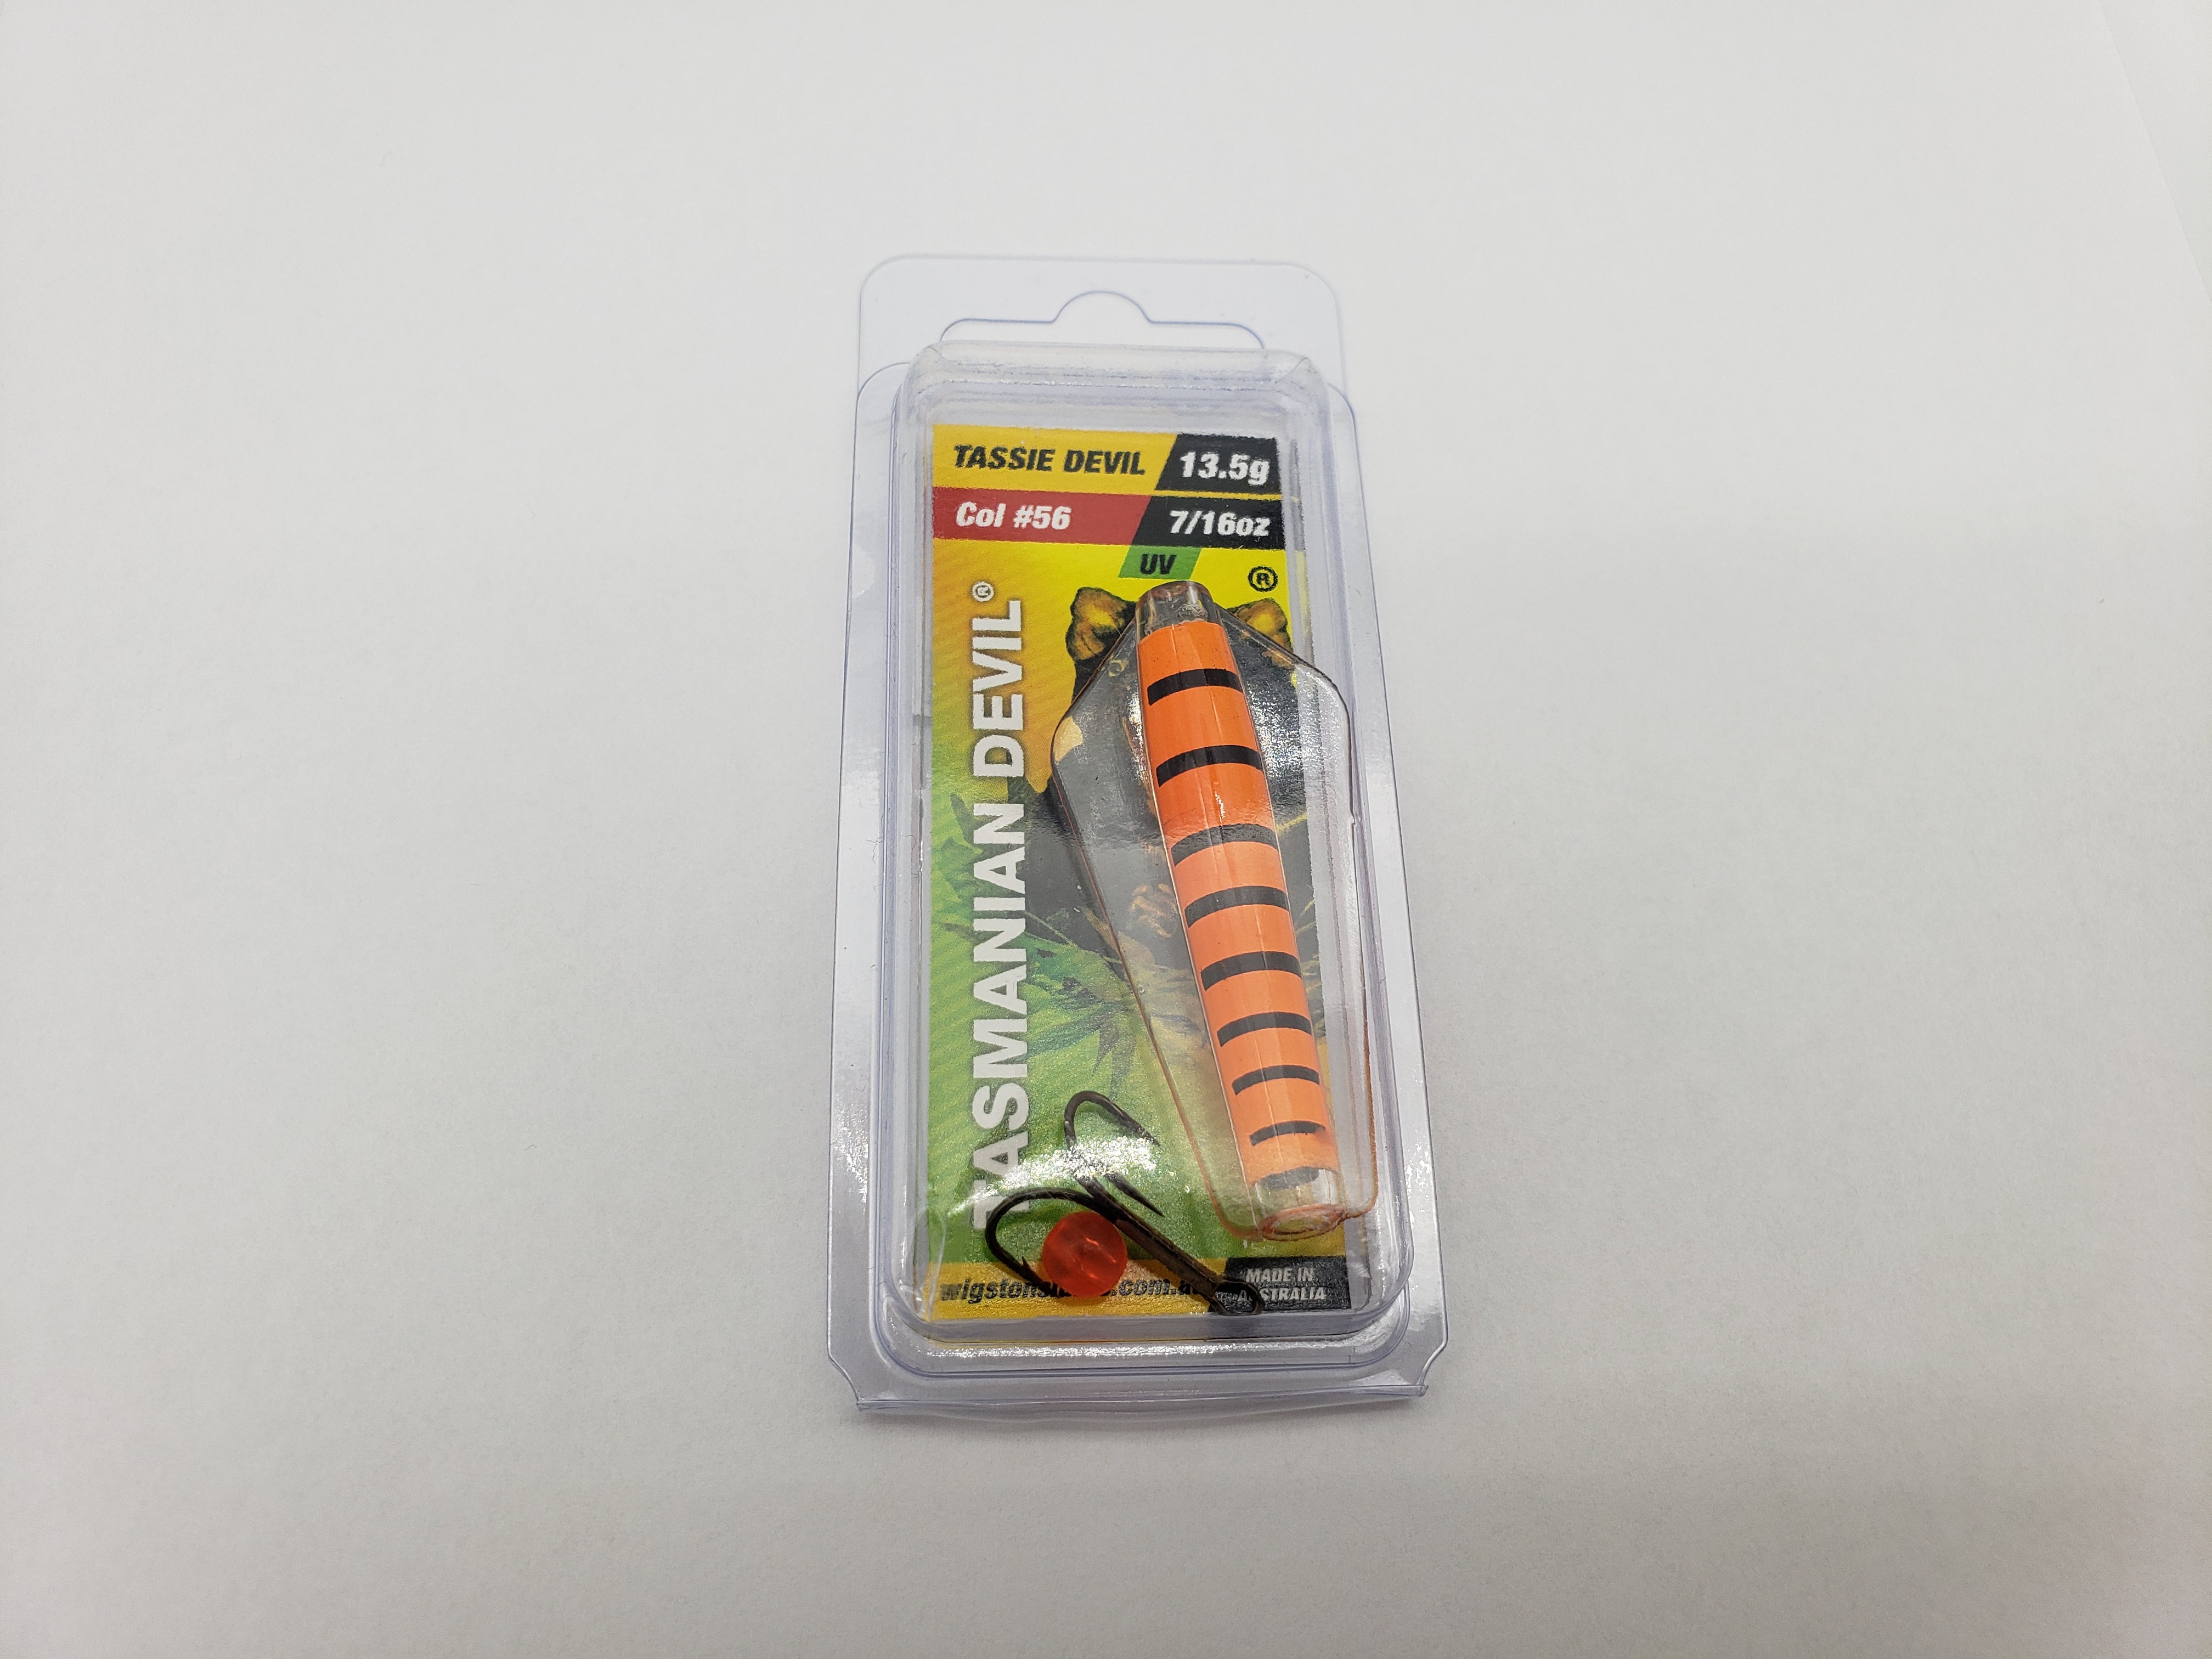 Tasmanian Devil 7g River Pack - 4pk – Trophy Trout Lures and Fly